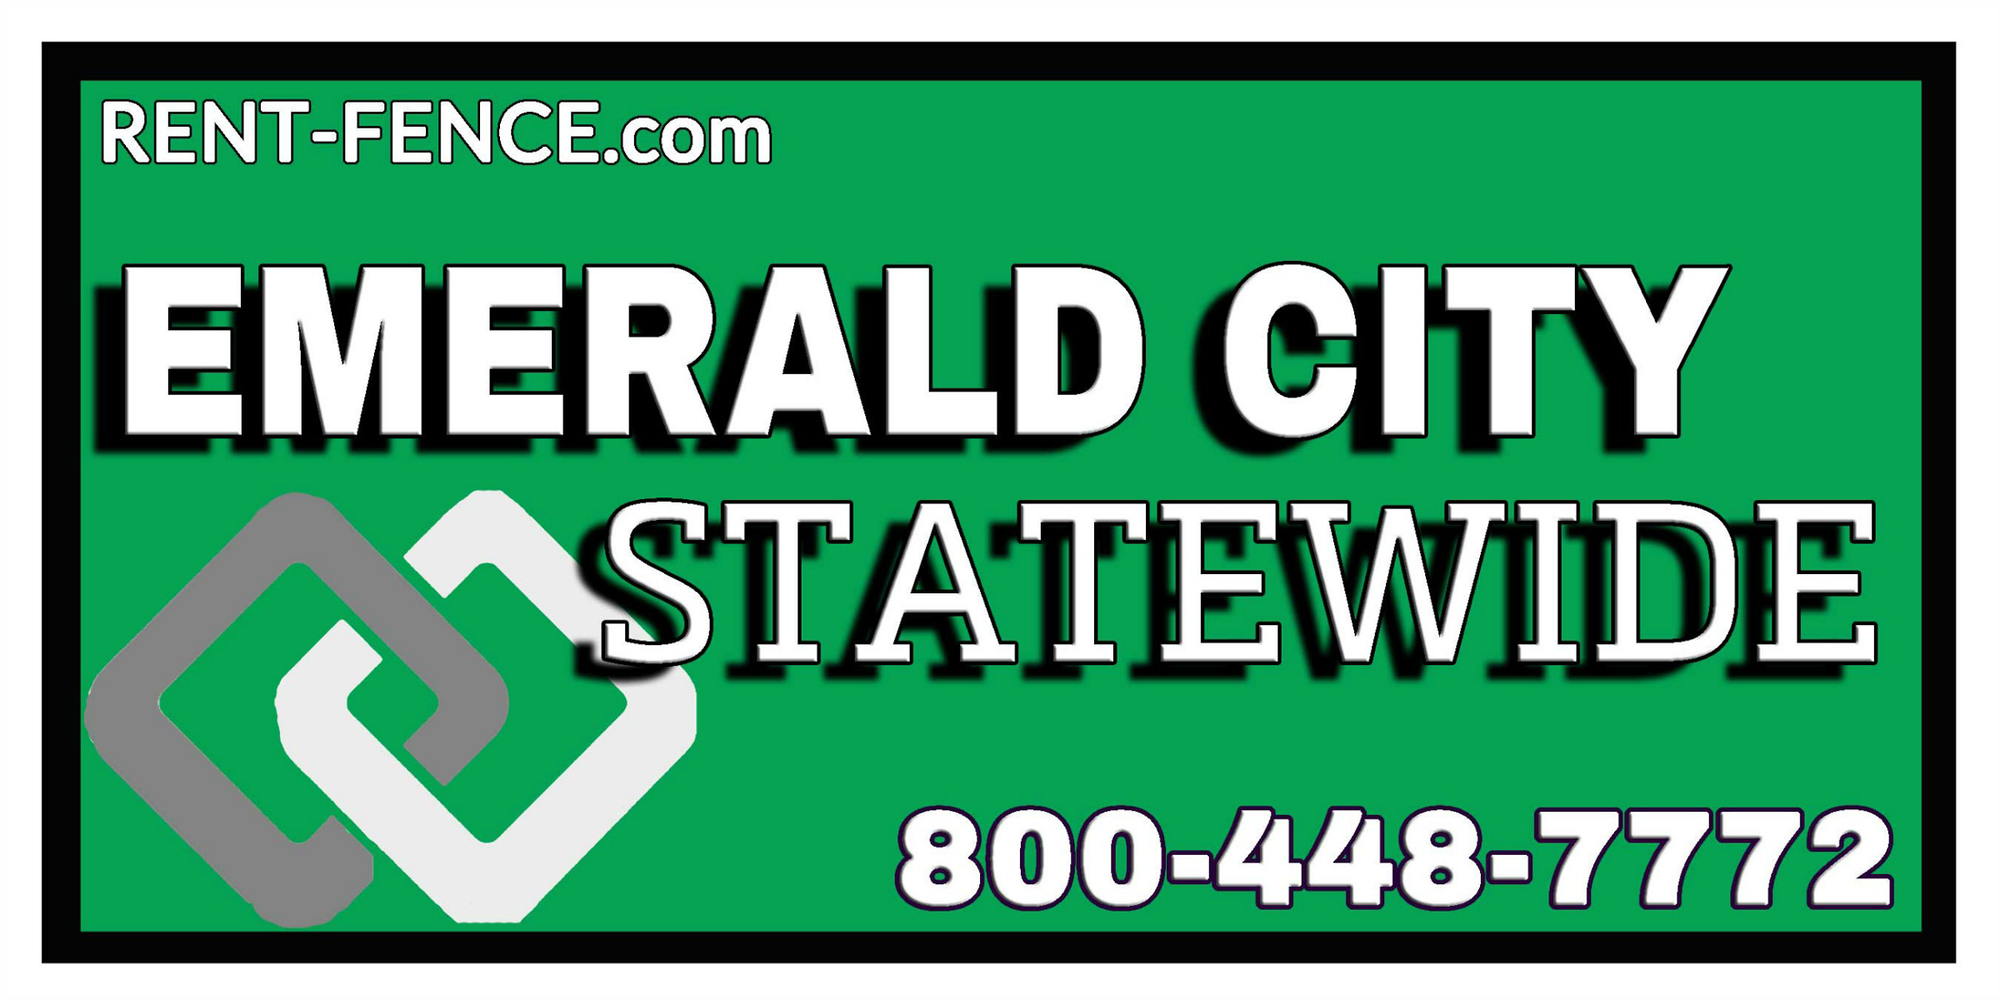 Emerald City Statewide Fence Rentals